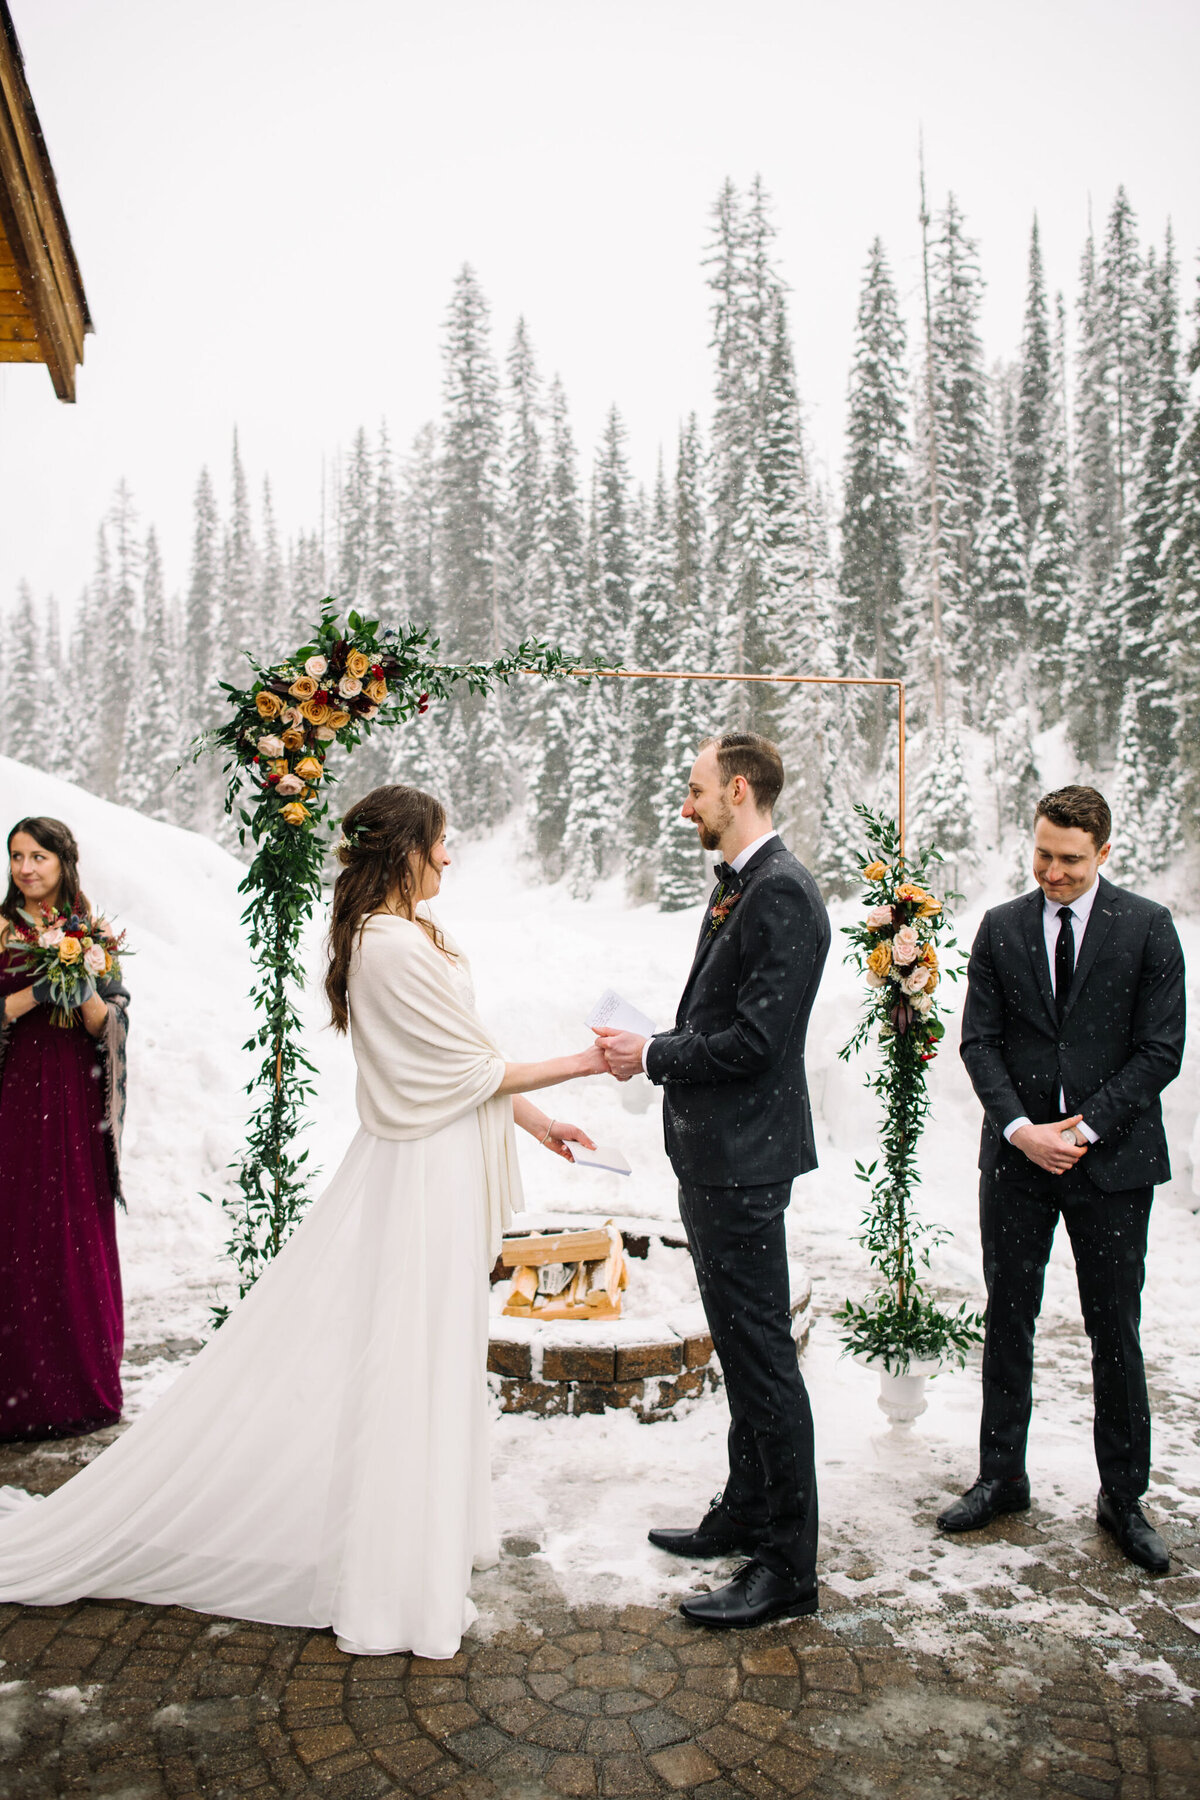 Outdoor winter wedding at Emerald Lake Lodge, rustic and classic Field, British Columbia wedding venue, featured on the Brontë Bride Vendor Guide.